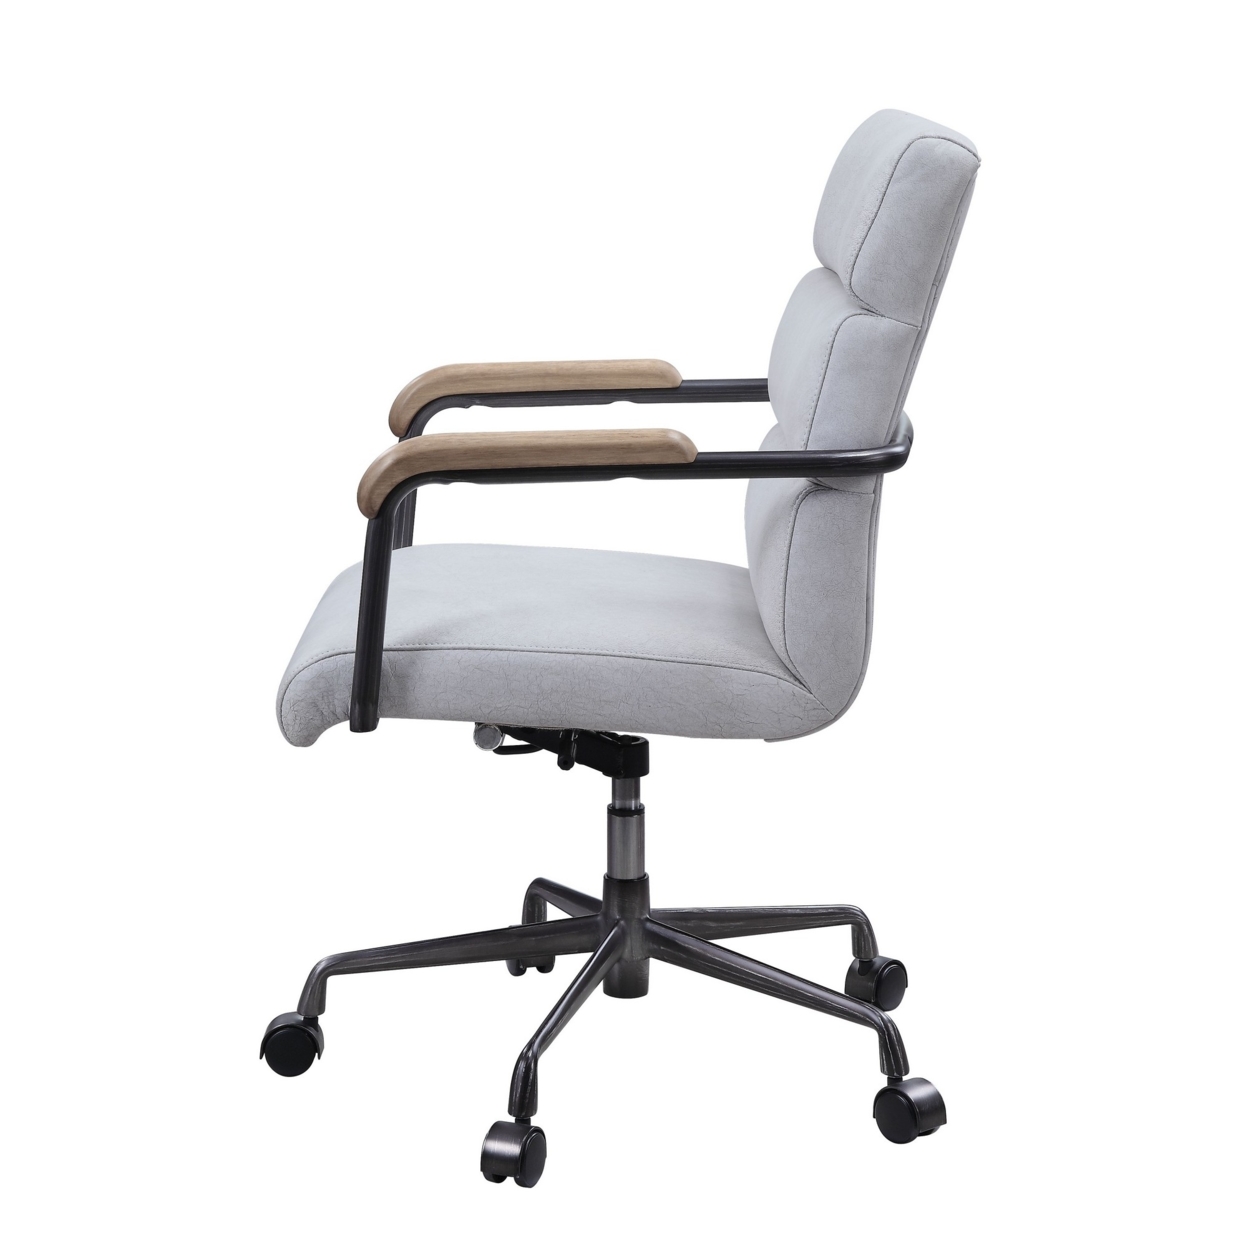 Office Chair With 360 Swivel And 5 Star Base, Vintage White And Brown- Saltoro Sherpi